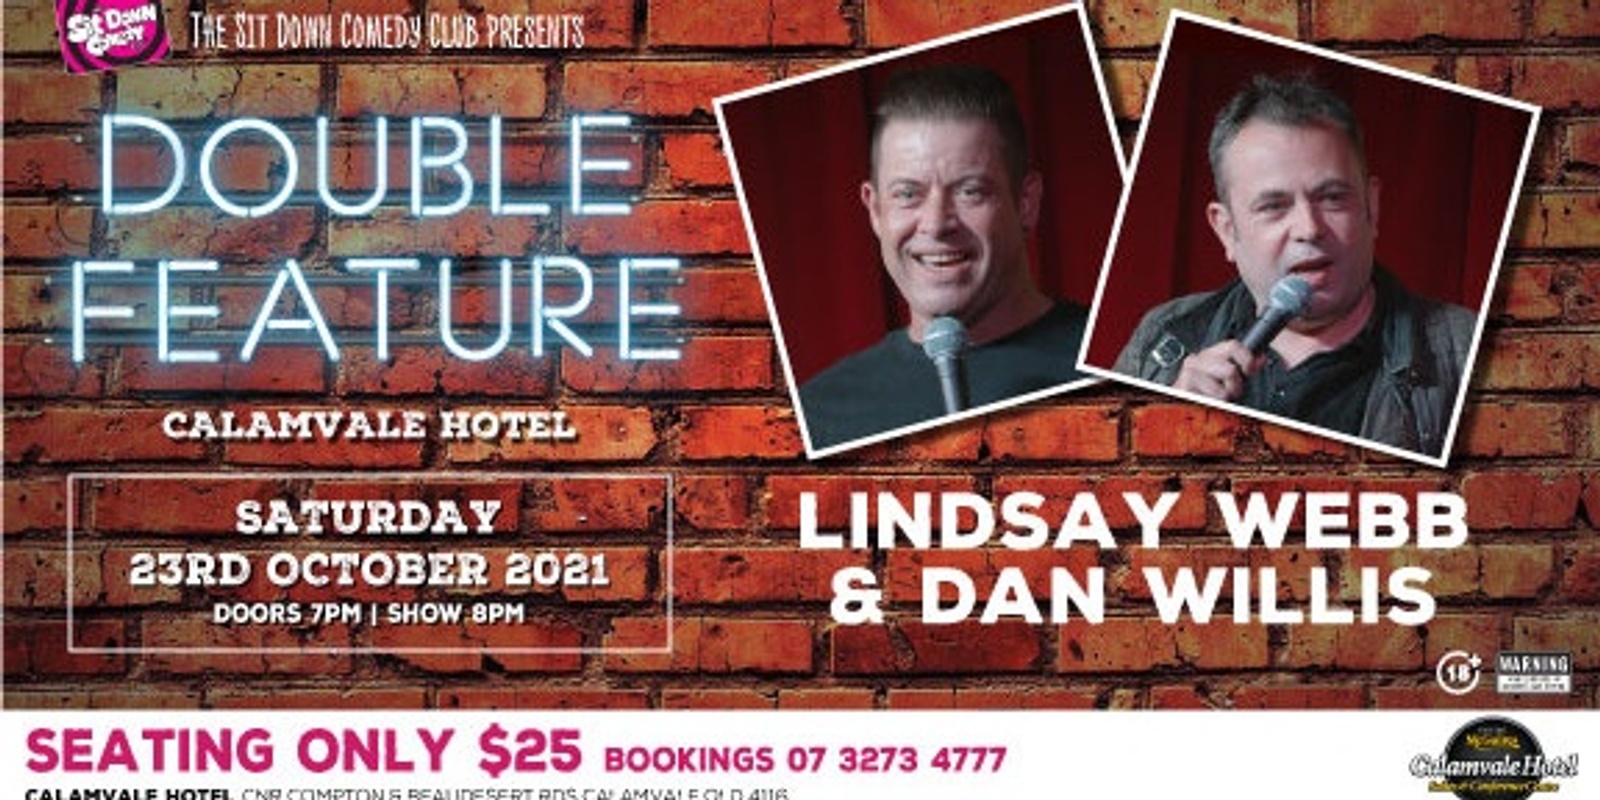 Banner image for Sit Down Comedy Club Double Feature at the Calamvale Hotel - Saturday 23rd October